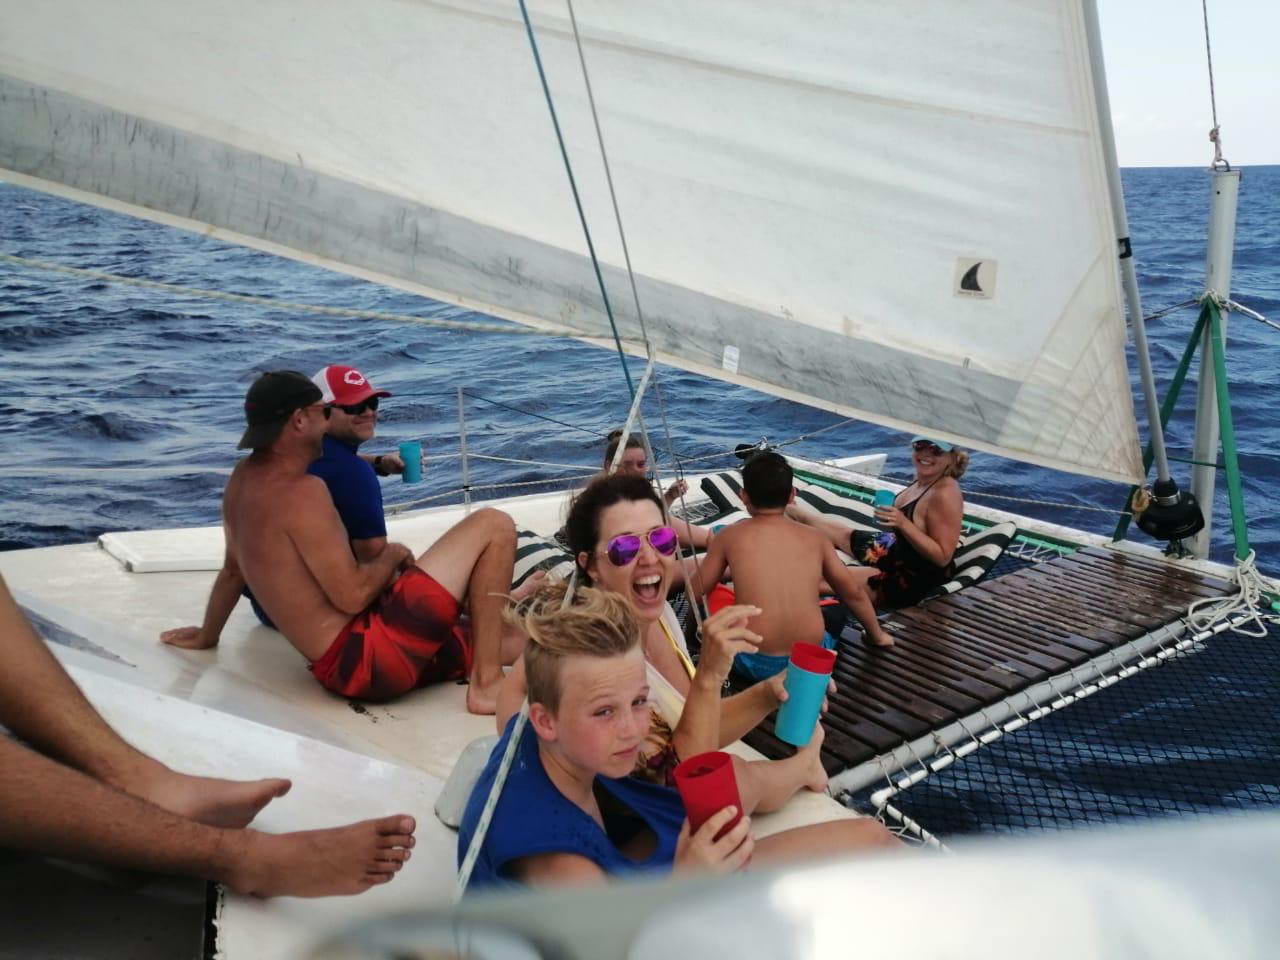 Cozumel Catamaran 30ft 15 people for rent and tours